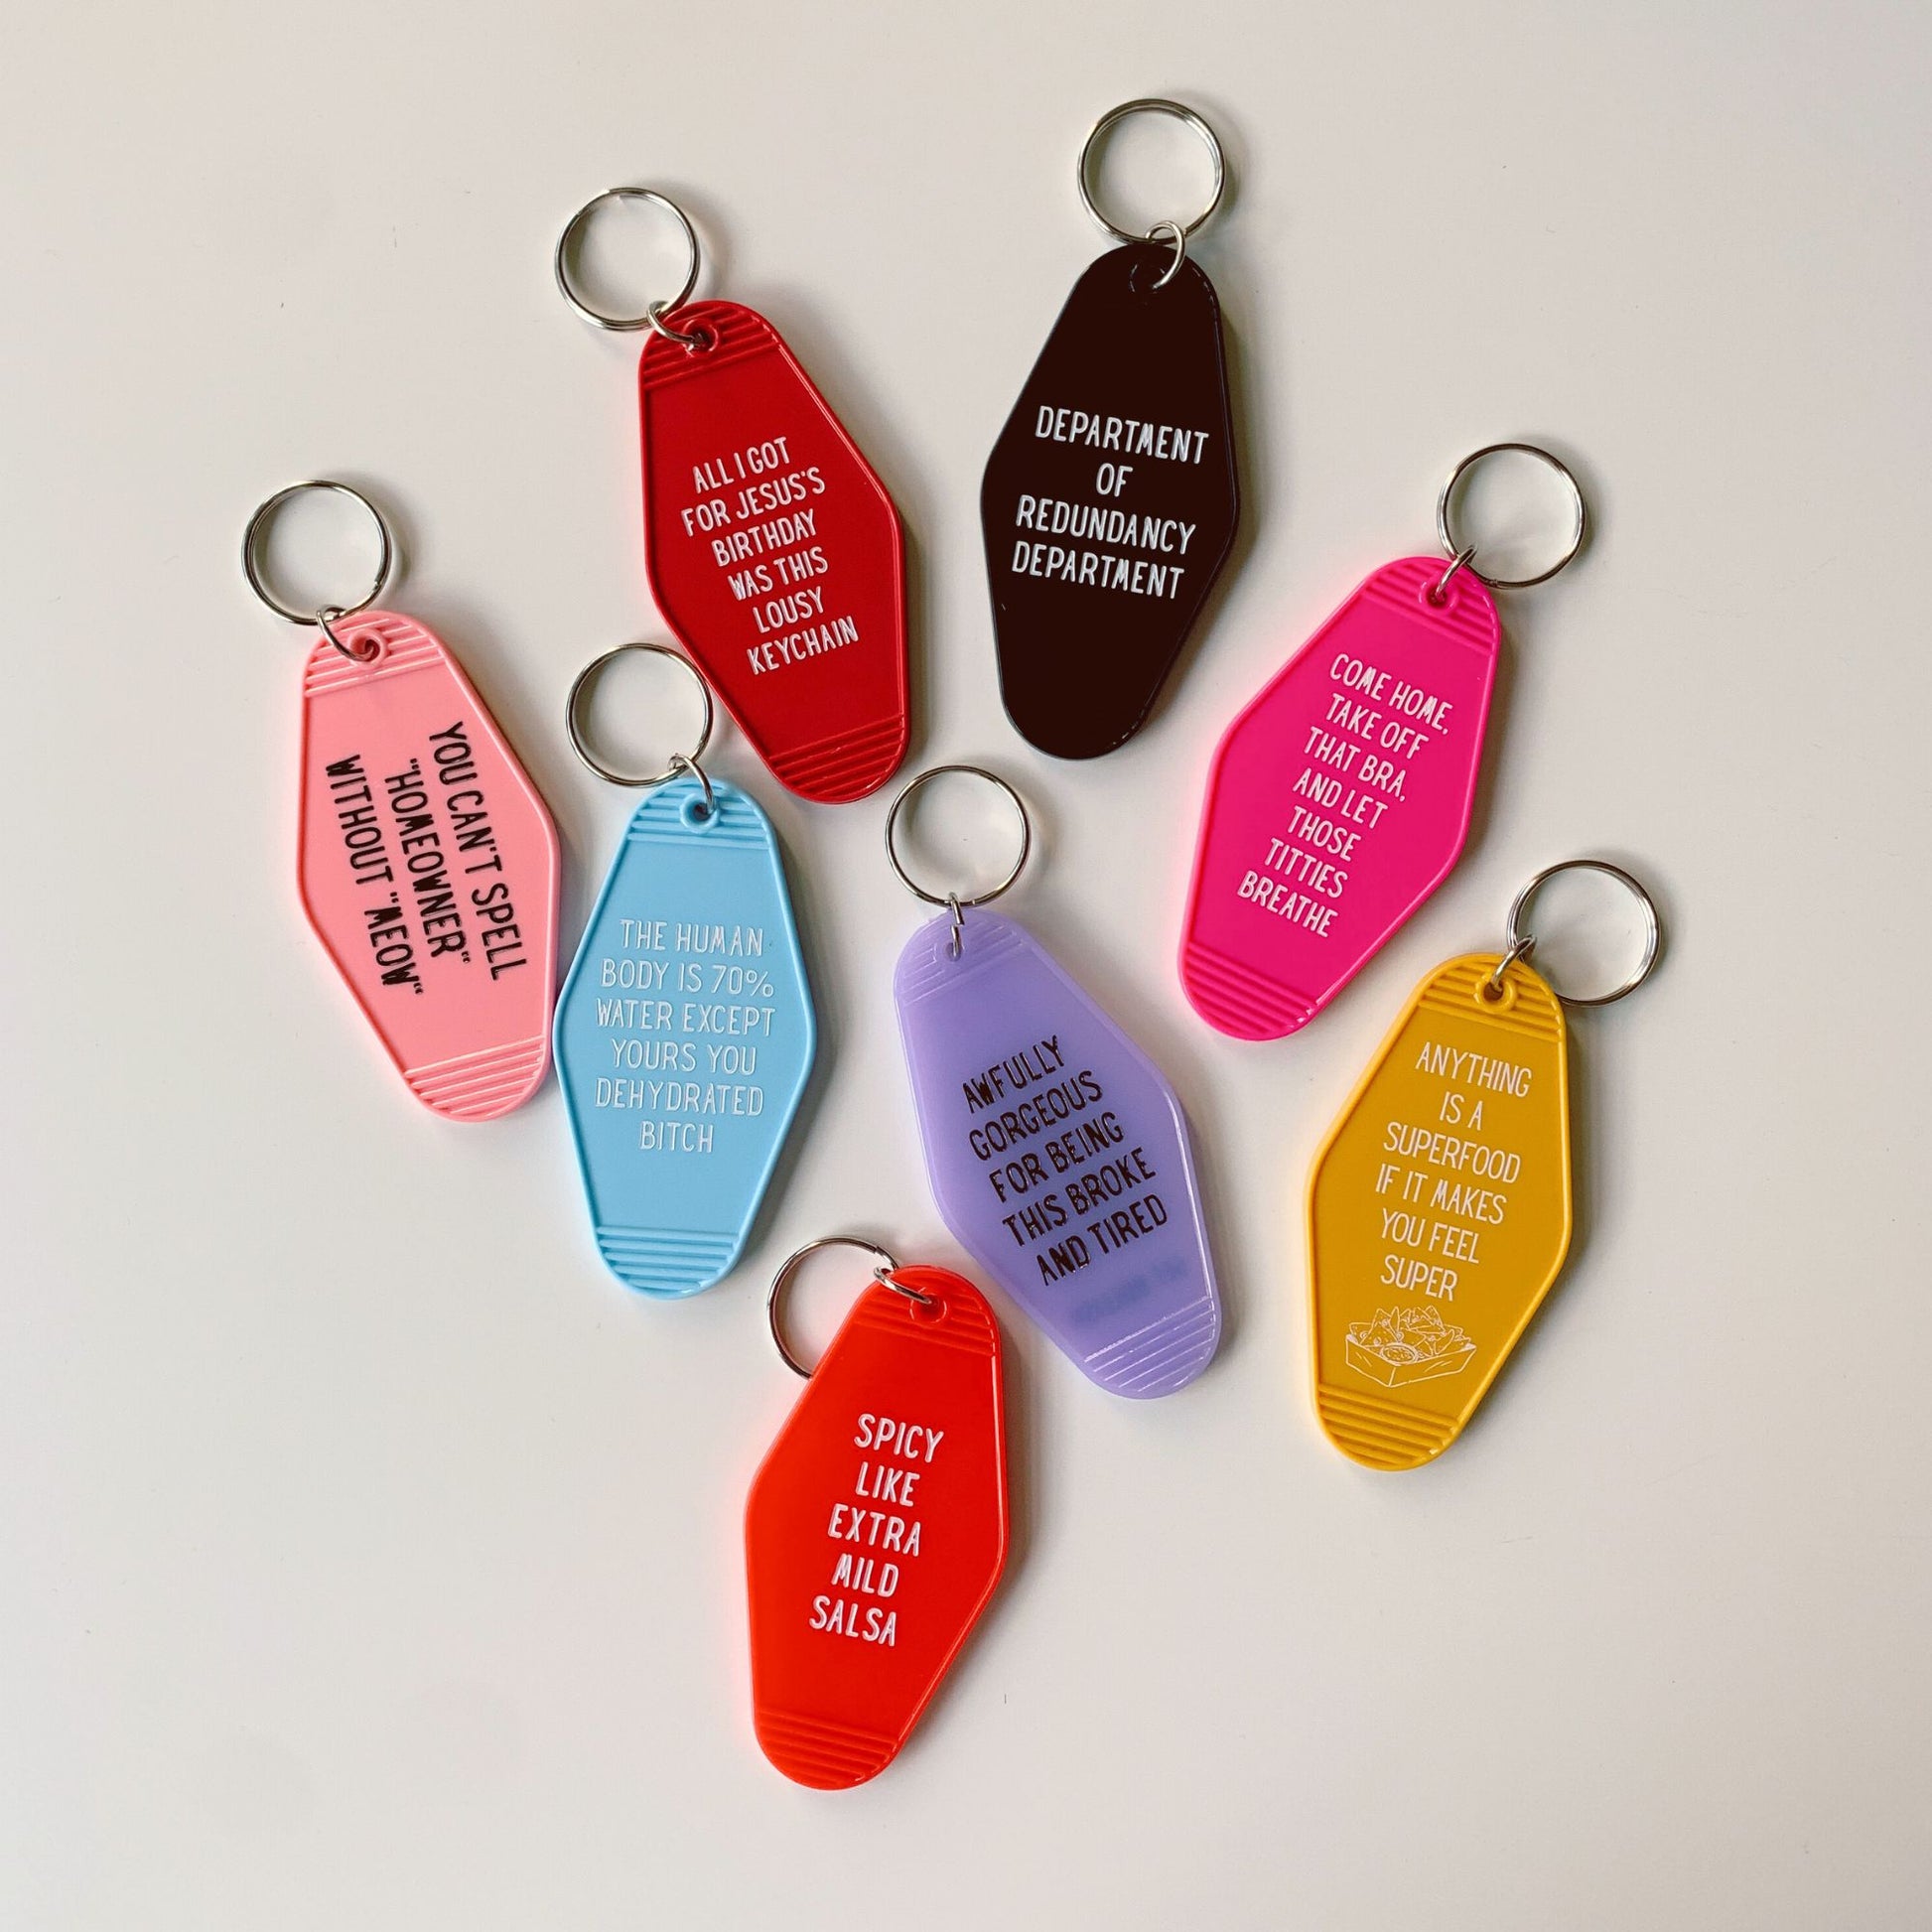 Come Home Take Off That Bra Motel Style Keychain in Fuchsia Pink